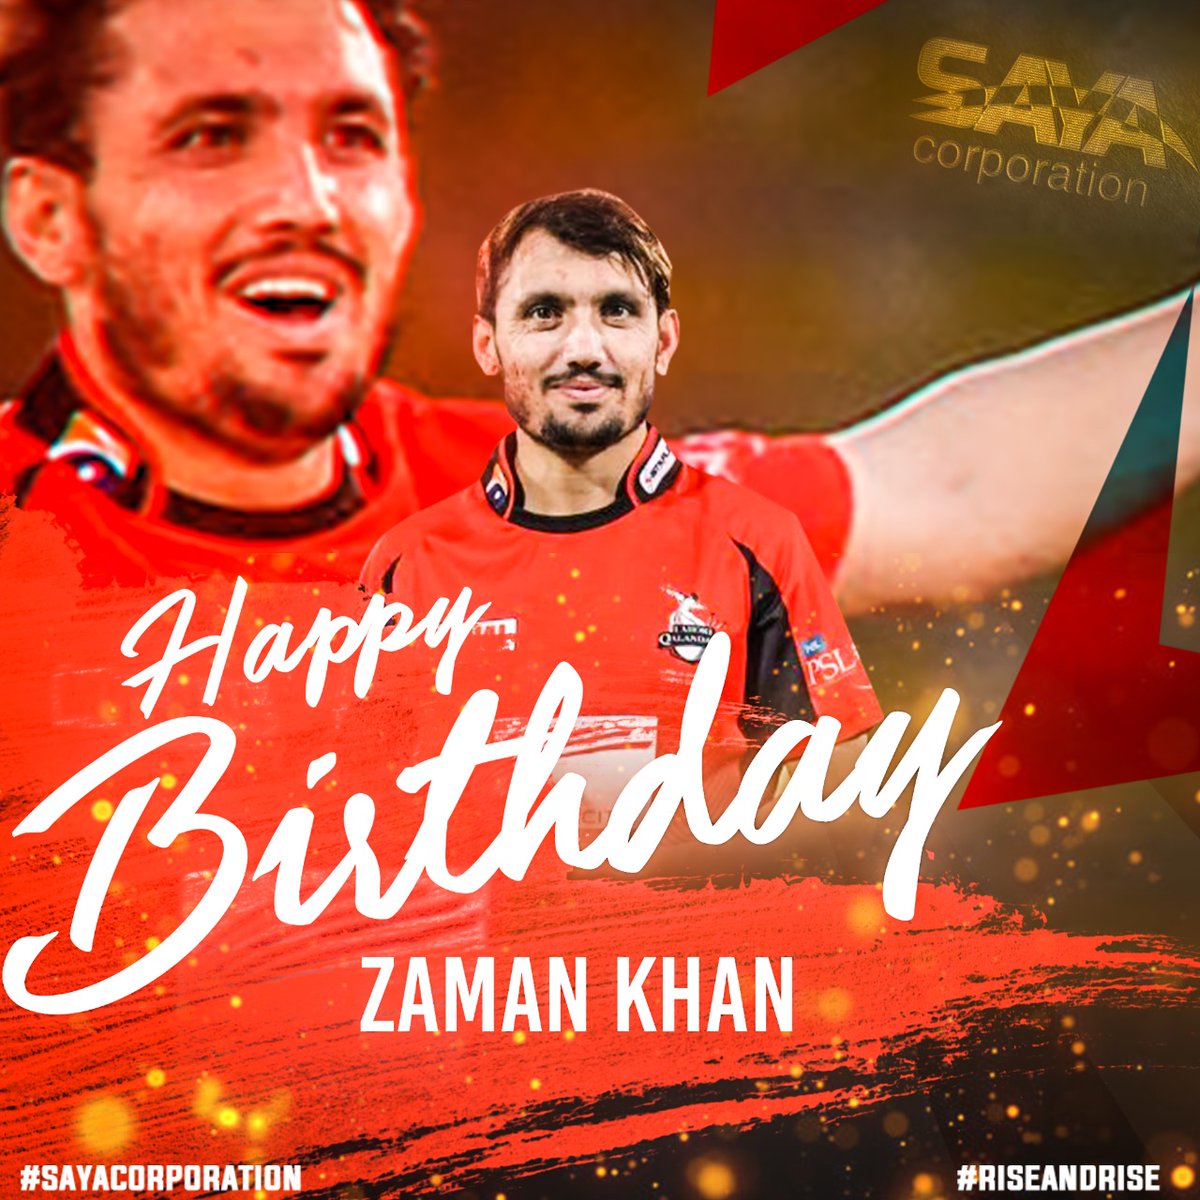 Zaman Khan, a storm in the world of cricket turns 21 today 🎉 From Pakistan under-16's to the skies of world cricket he has achieved a lot, but the best is yet to come! ✨ #RiseAndRise #SayaCorporation @ZamanKhanPak @TalhaAisham